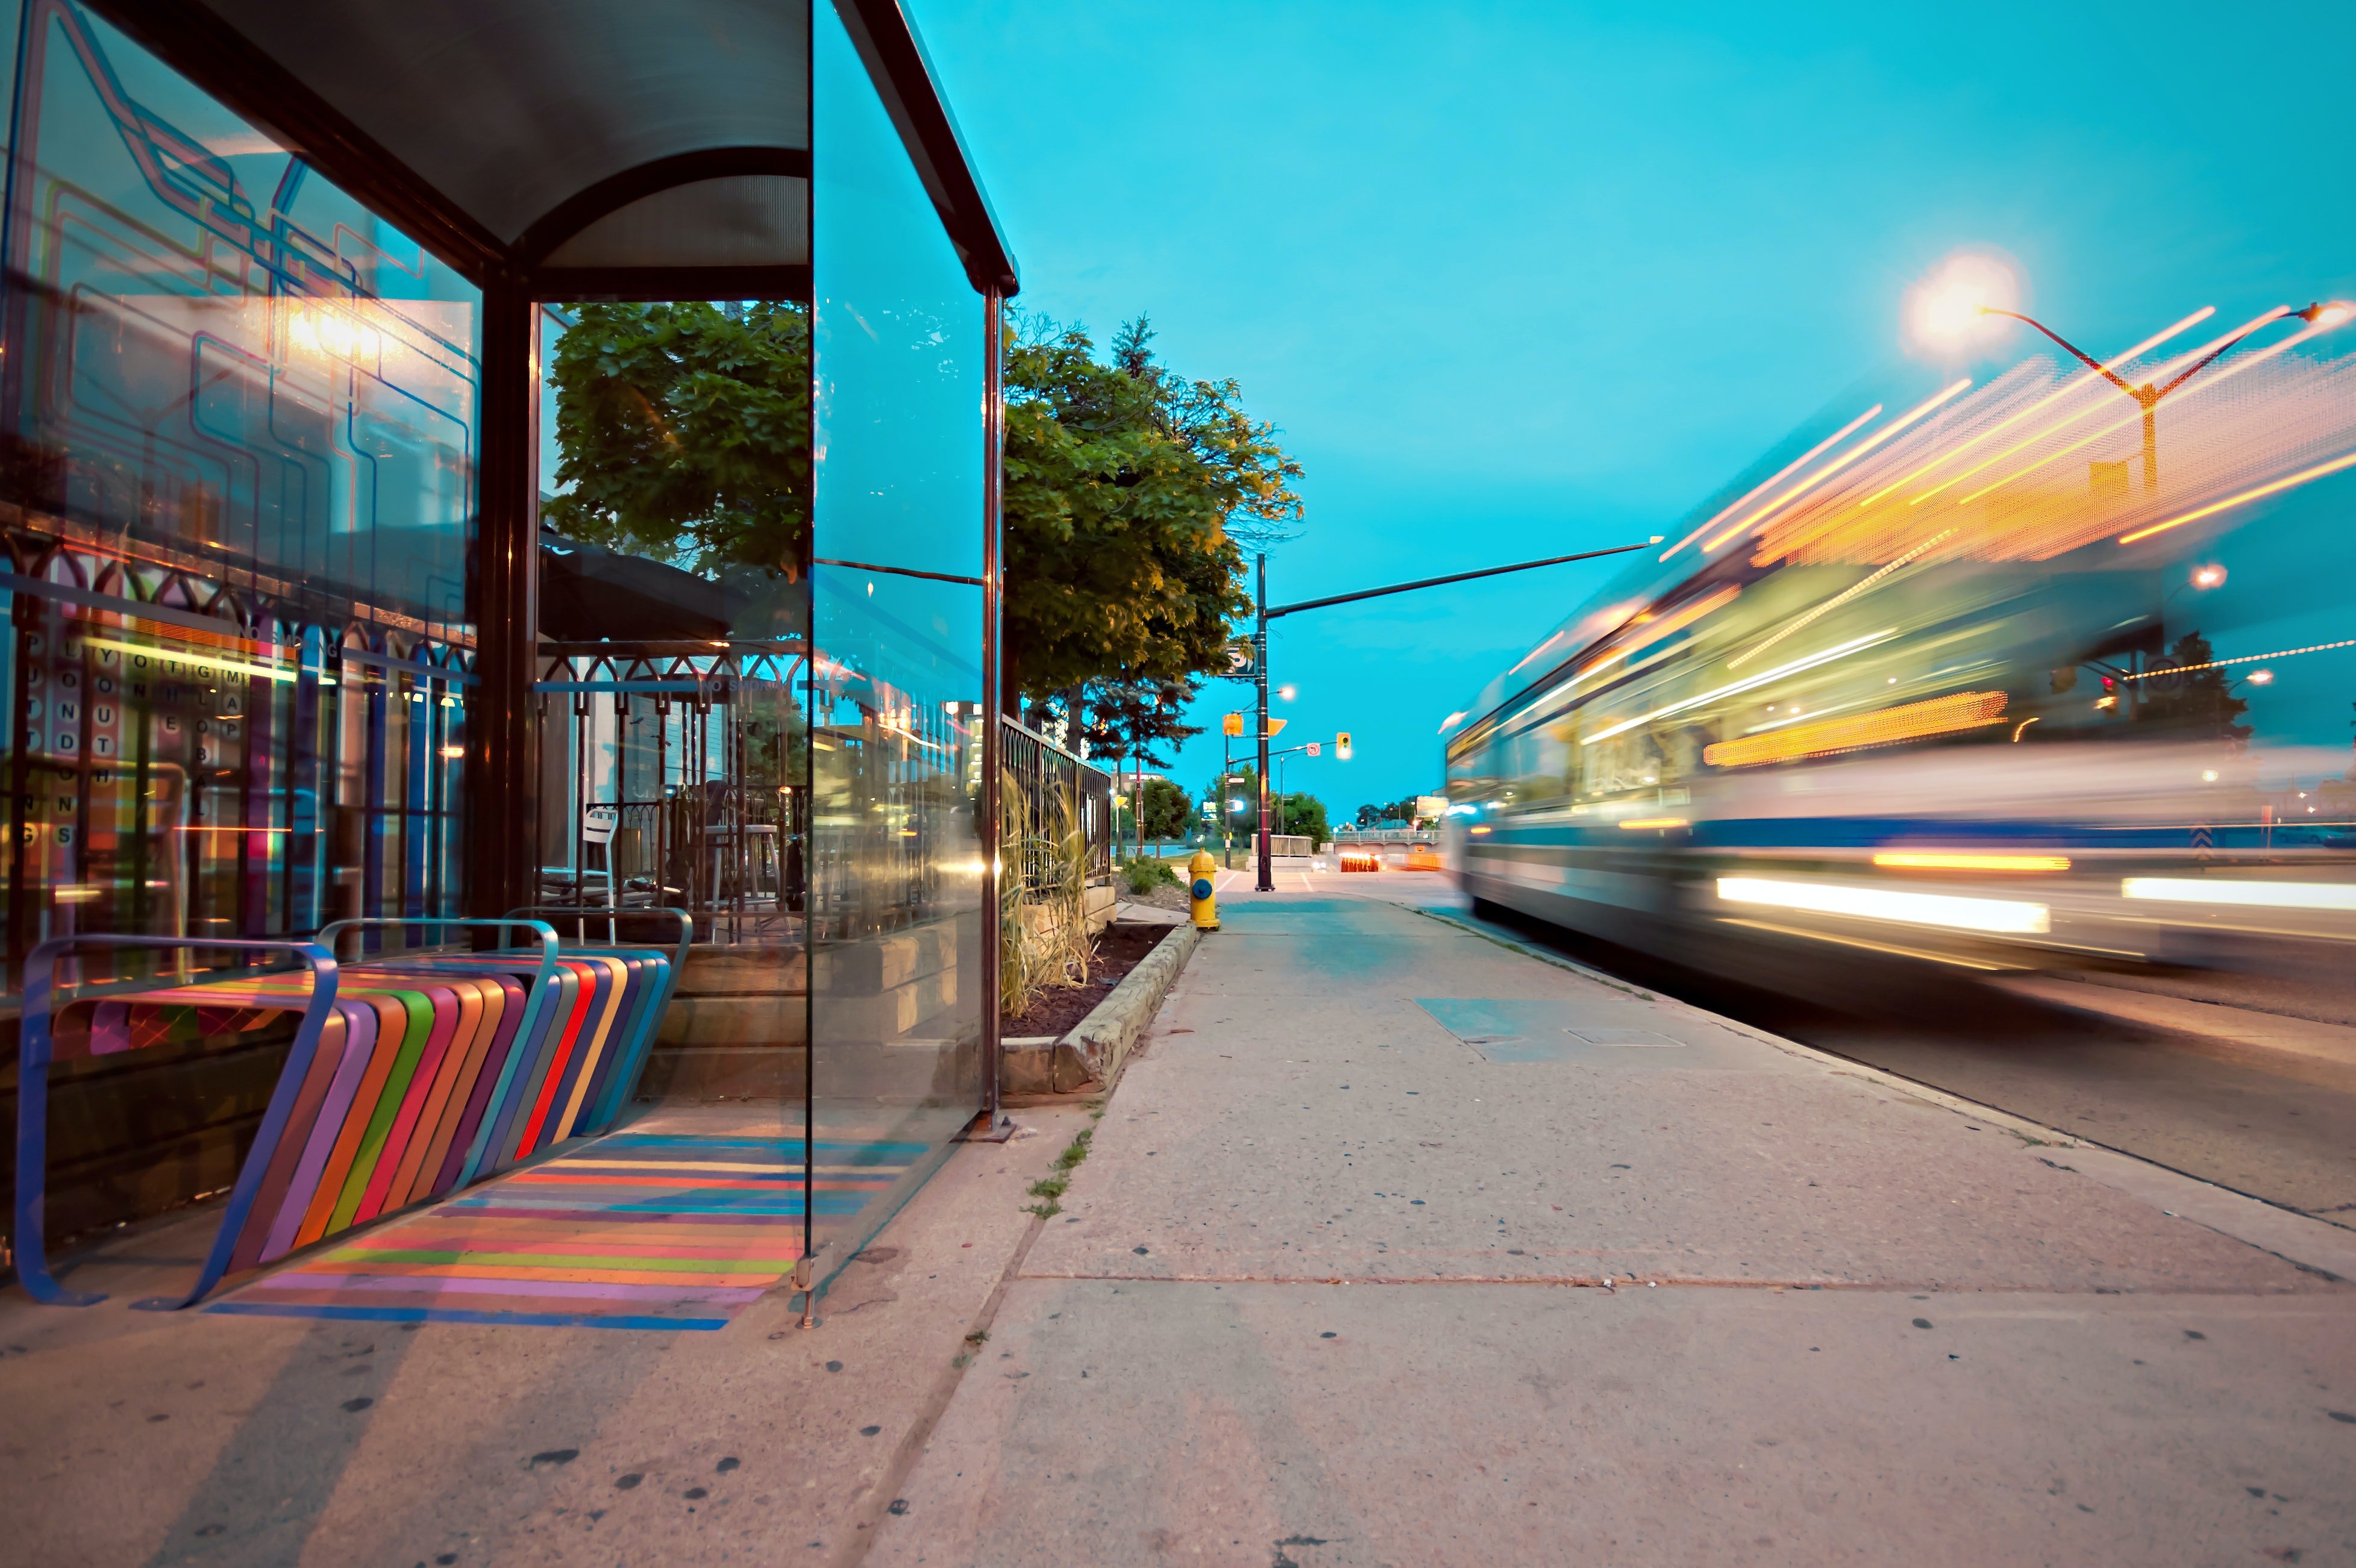 Image shows the blur of fast-moving vehicle passing a transport stop taken by Scott Webb and sourced from the online resource Pexels 